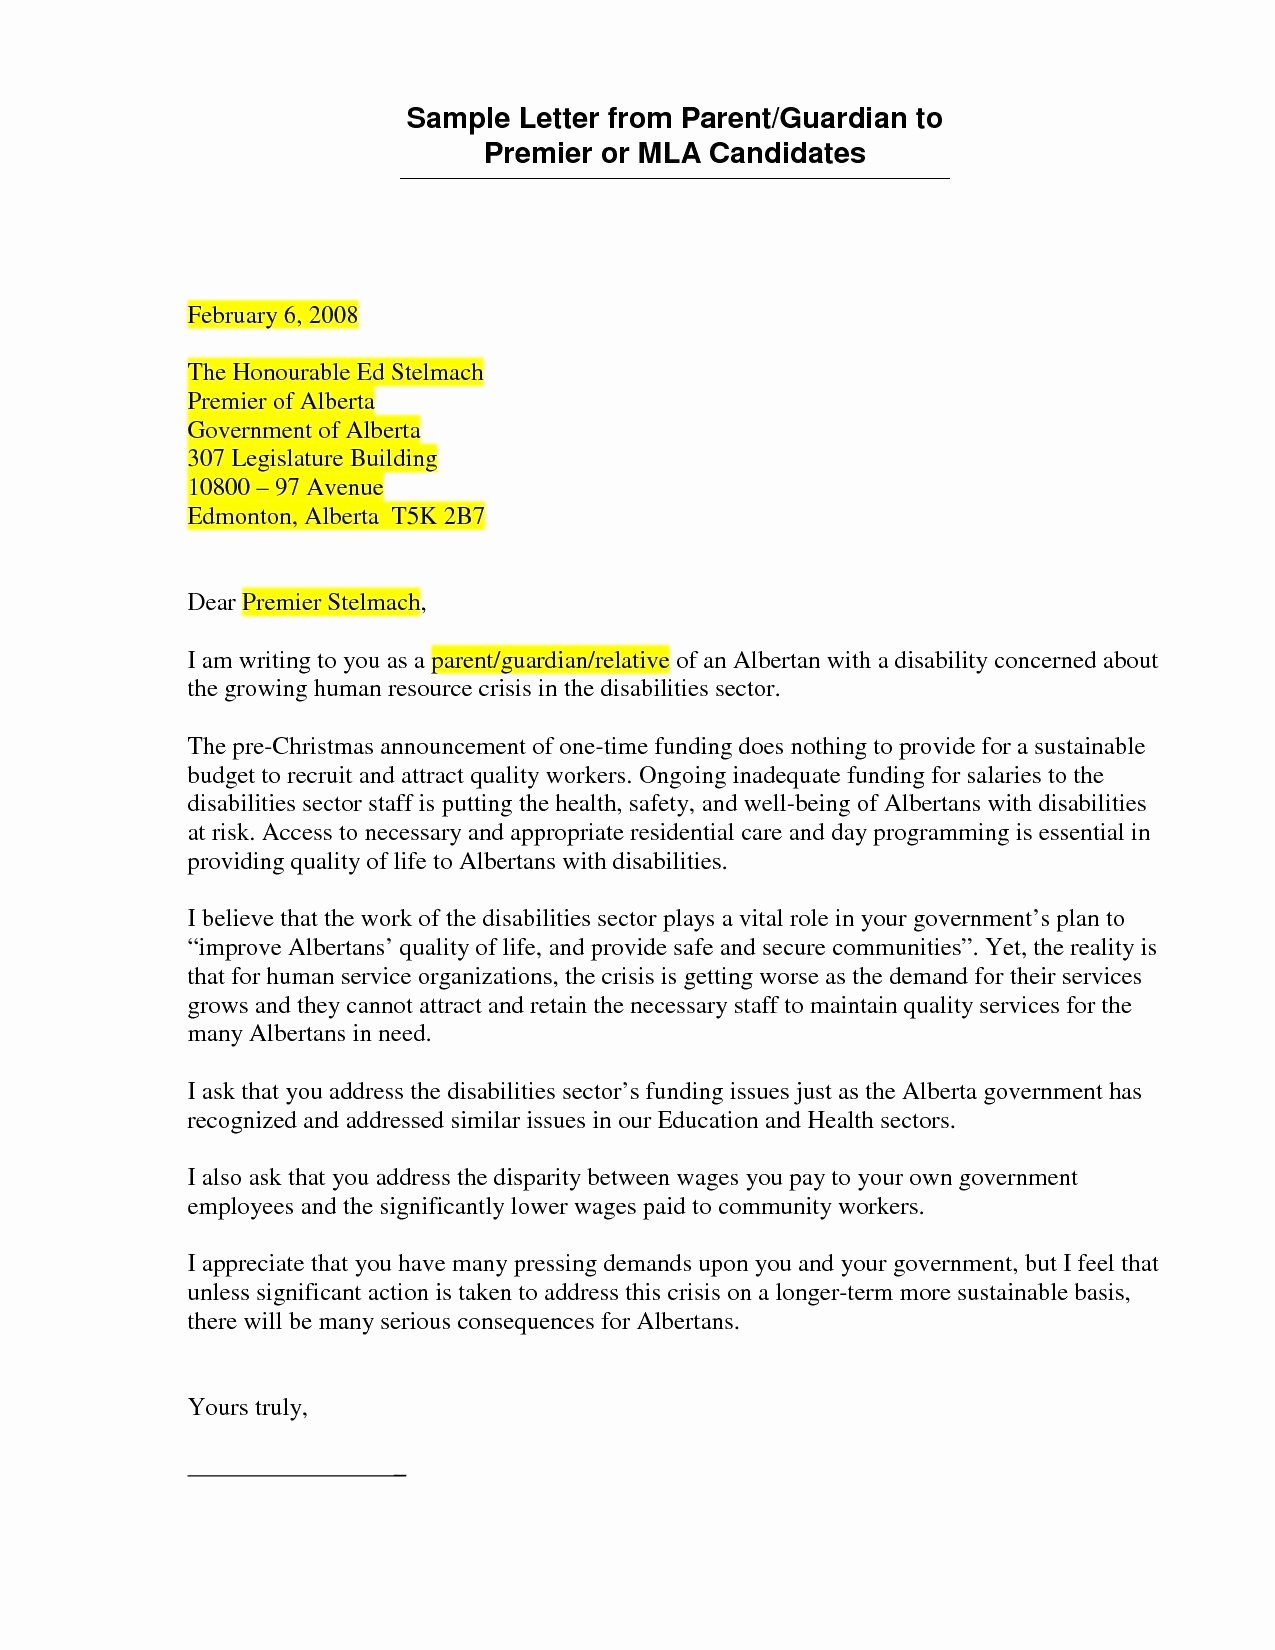 Letter In Mla format Best Of Mla Cover Letter Template Bluemooncatering